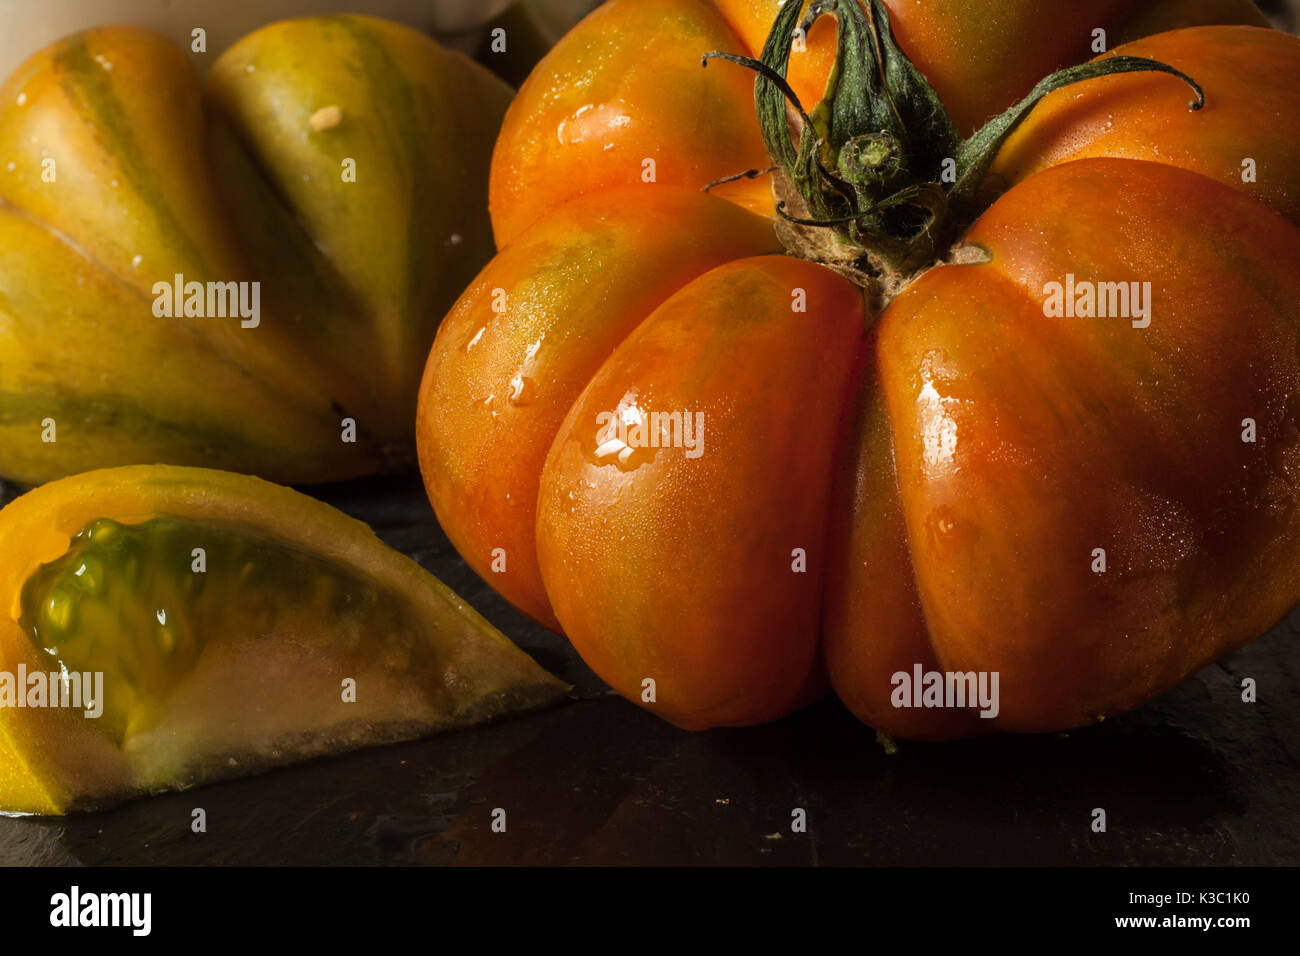 Red tomato and tomato slice with seeds close up Stock Photo